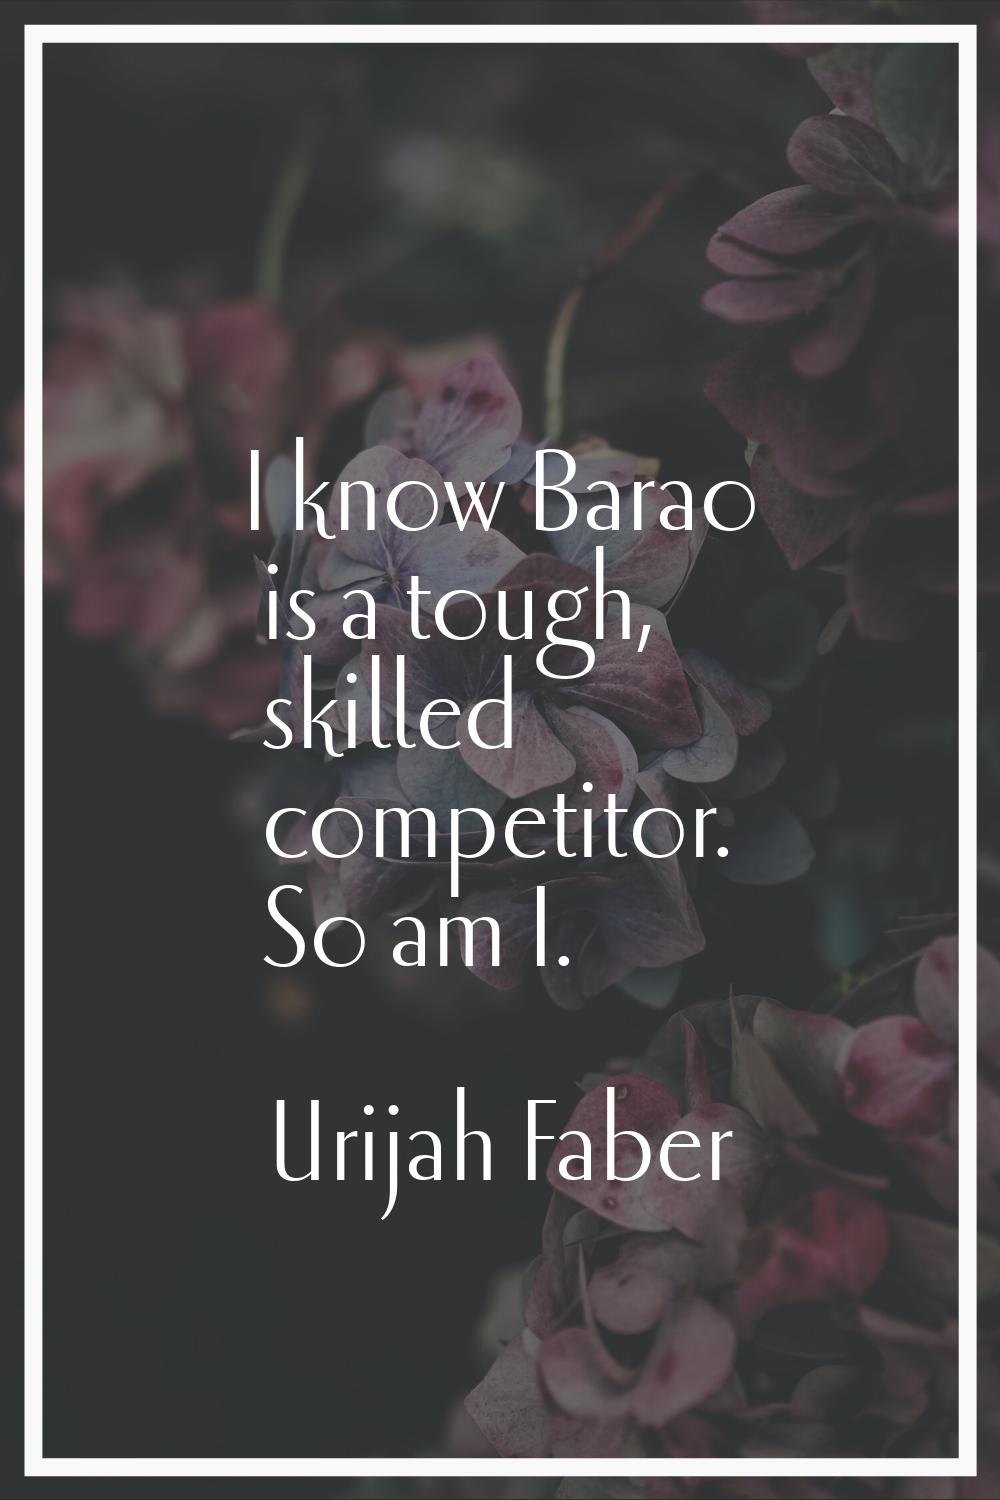 I know Barao is a tough, skilled competitor. So am I.